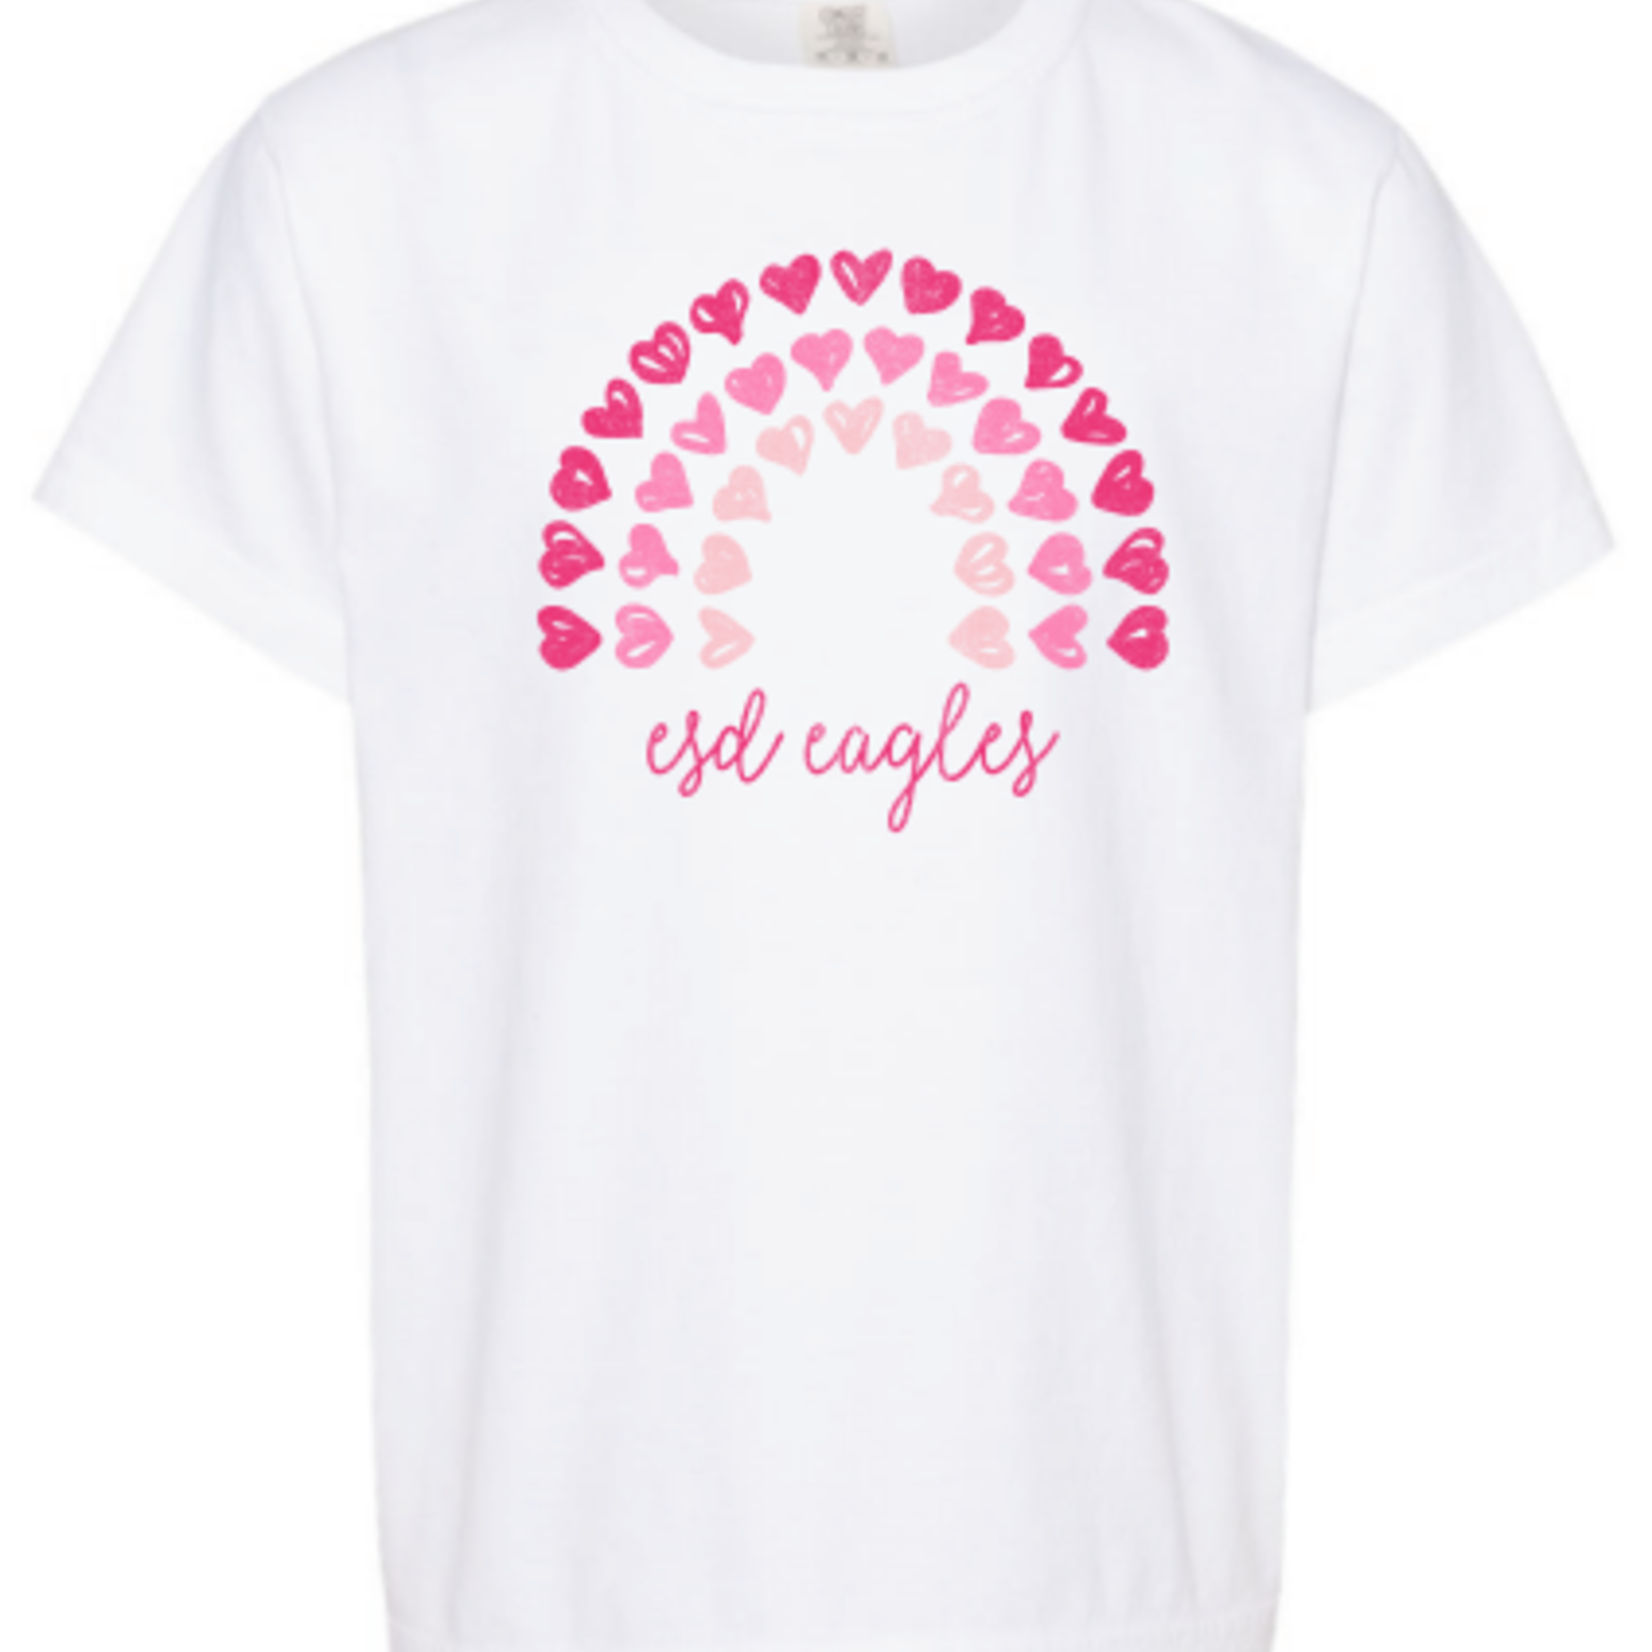 Comfort Colors Summit White Tee with Pink Hearts Rainbow